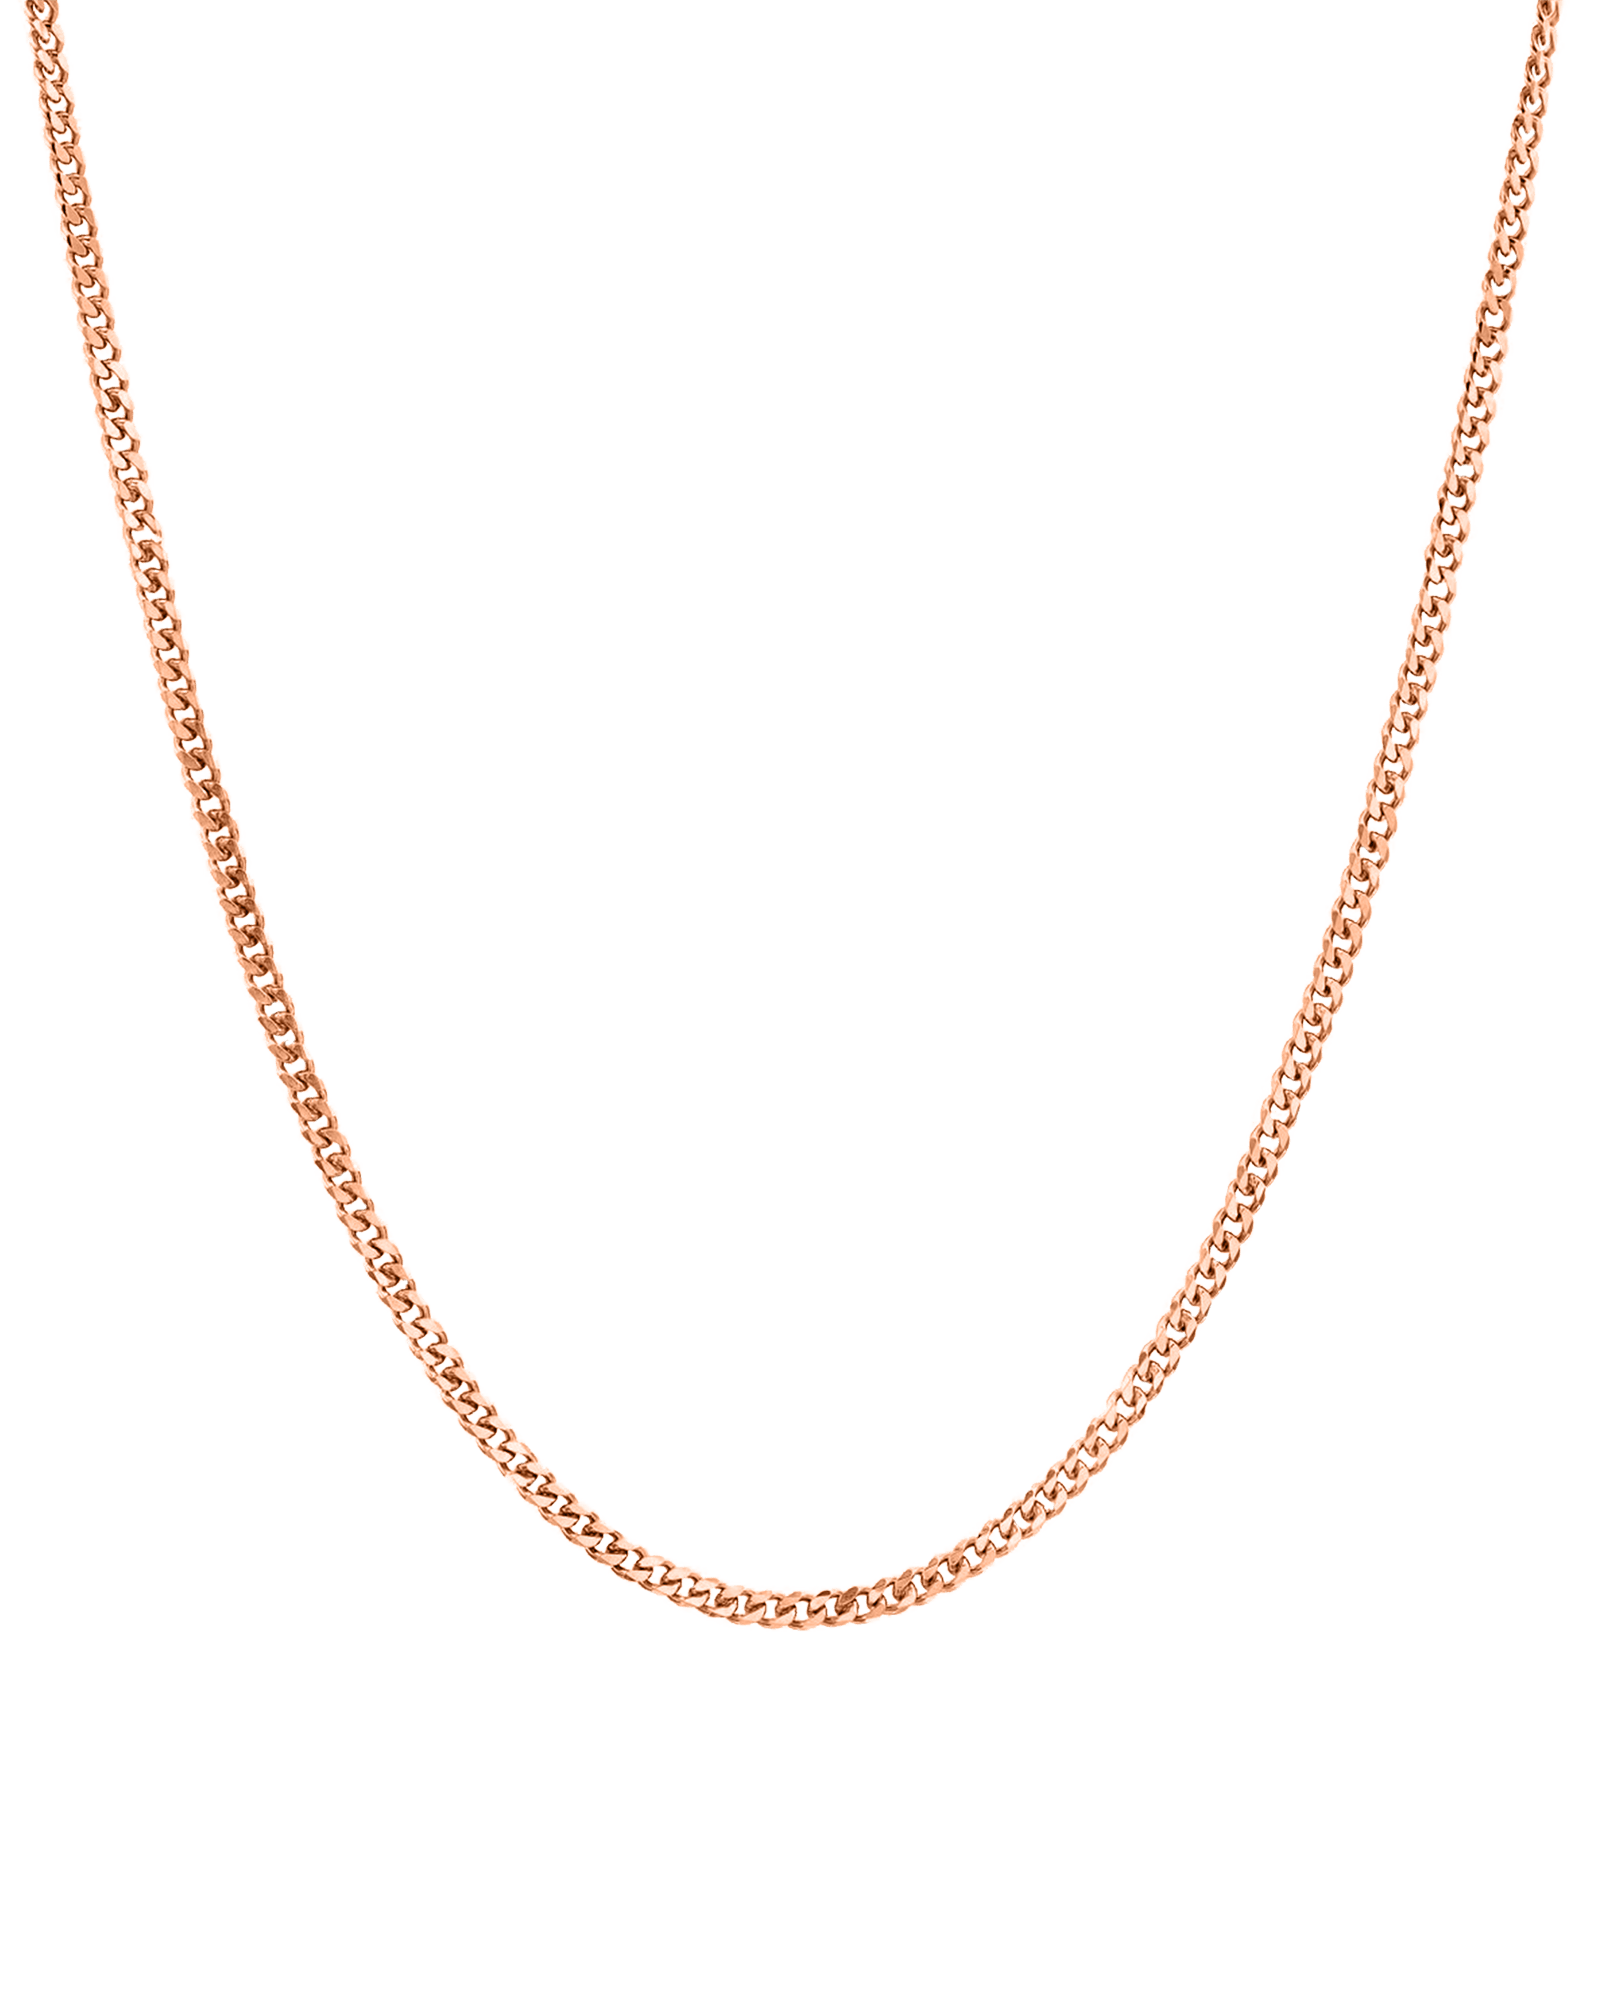 Double Curb Chain - 925 Sterling Silver Chains magal-dev 